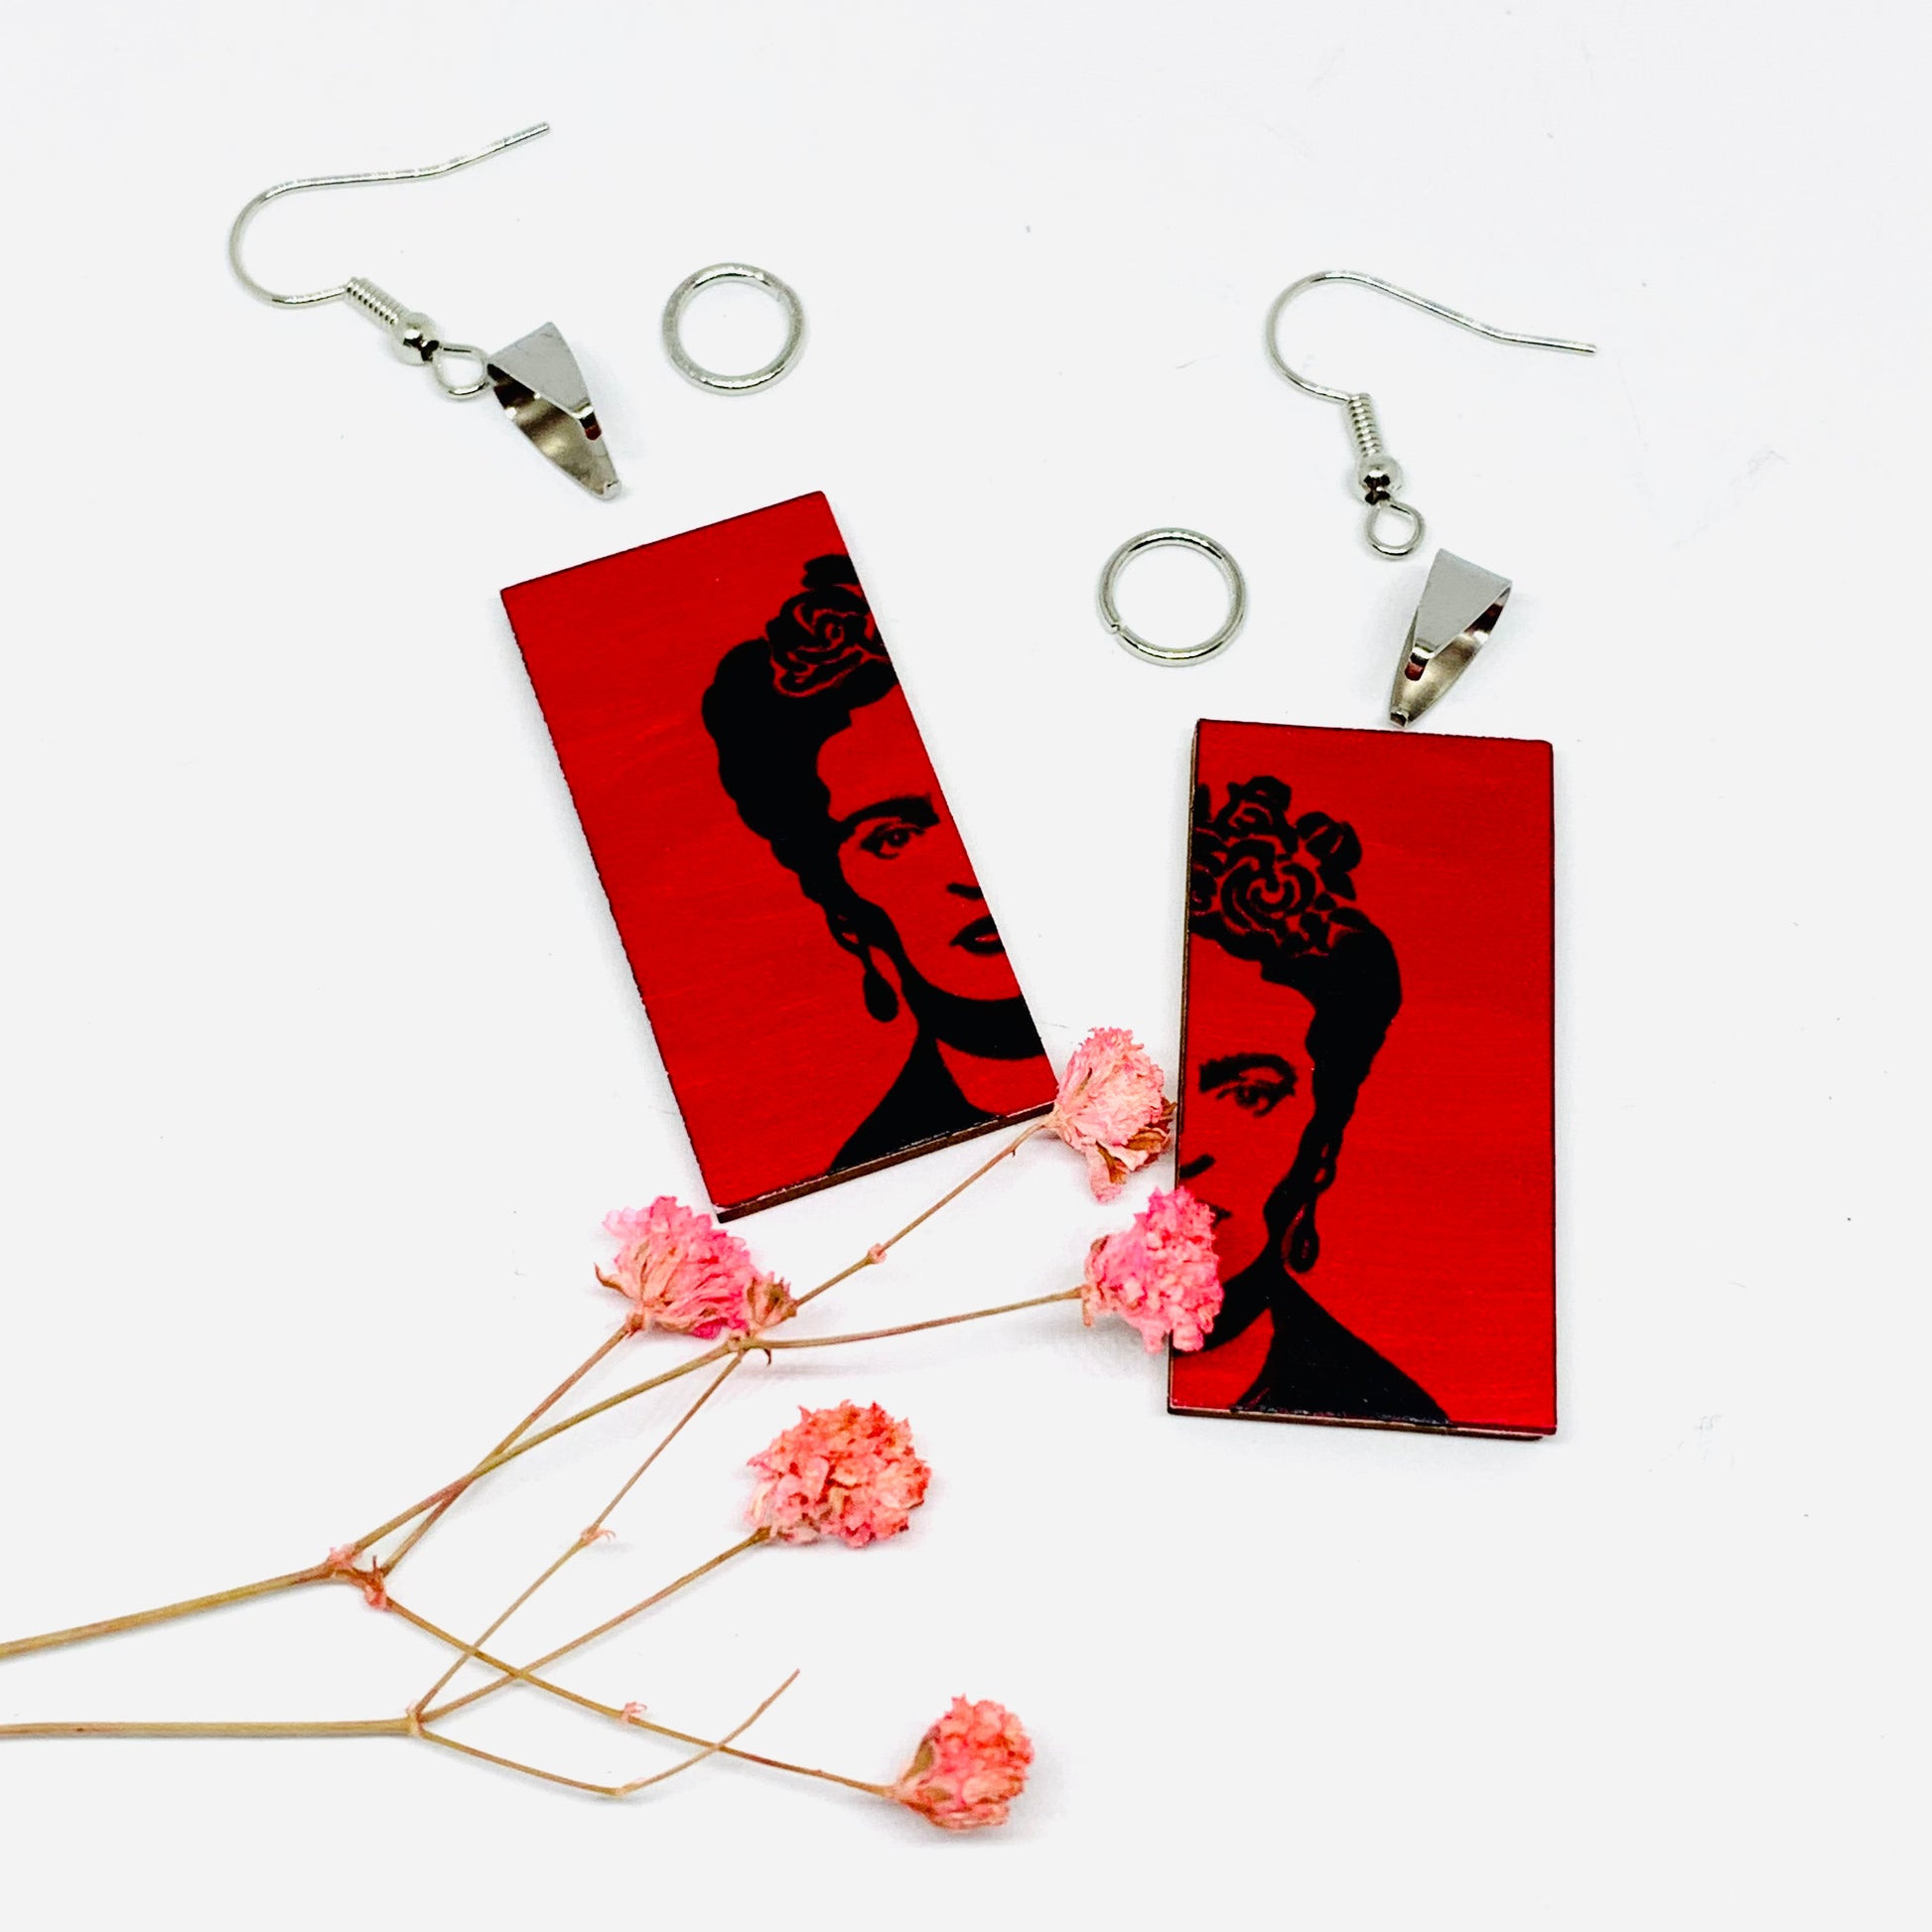 Frida Kahlo inspired earrings made of wood and hand painted. Stencil style art to wear. Red and Black. Trendy women and girls fashion. Mexican jewelry